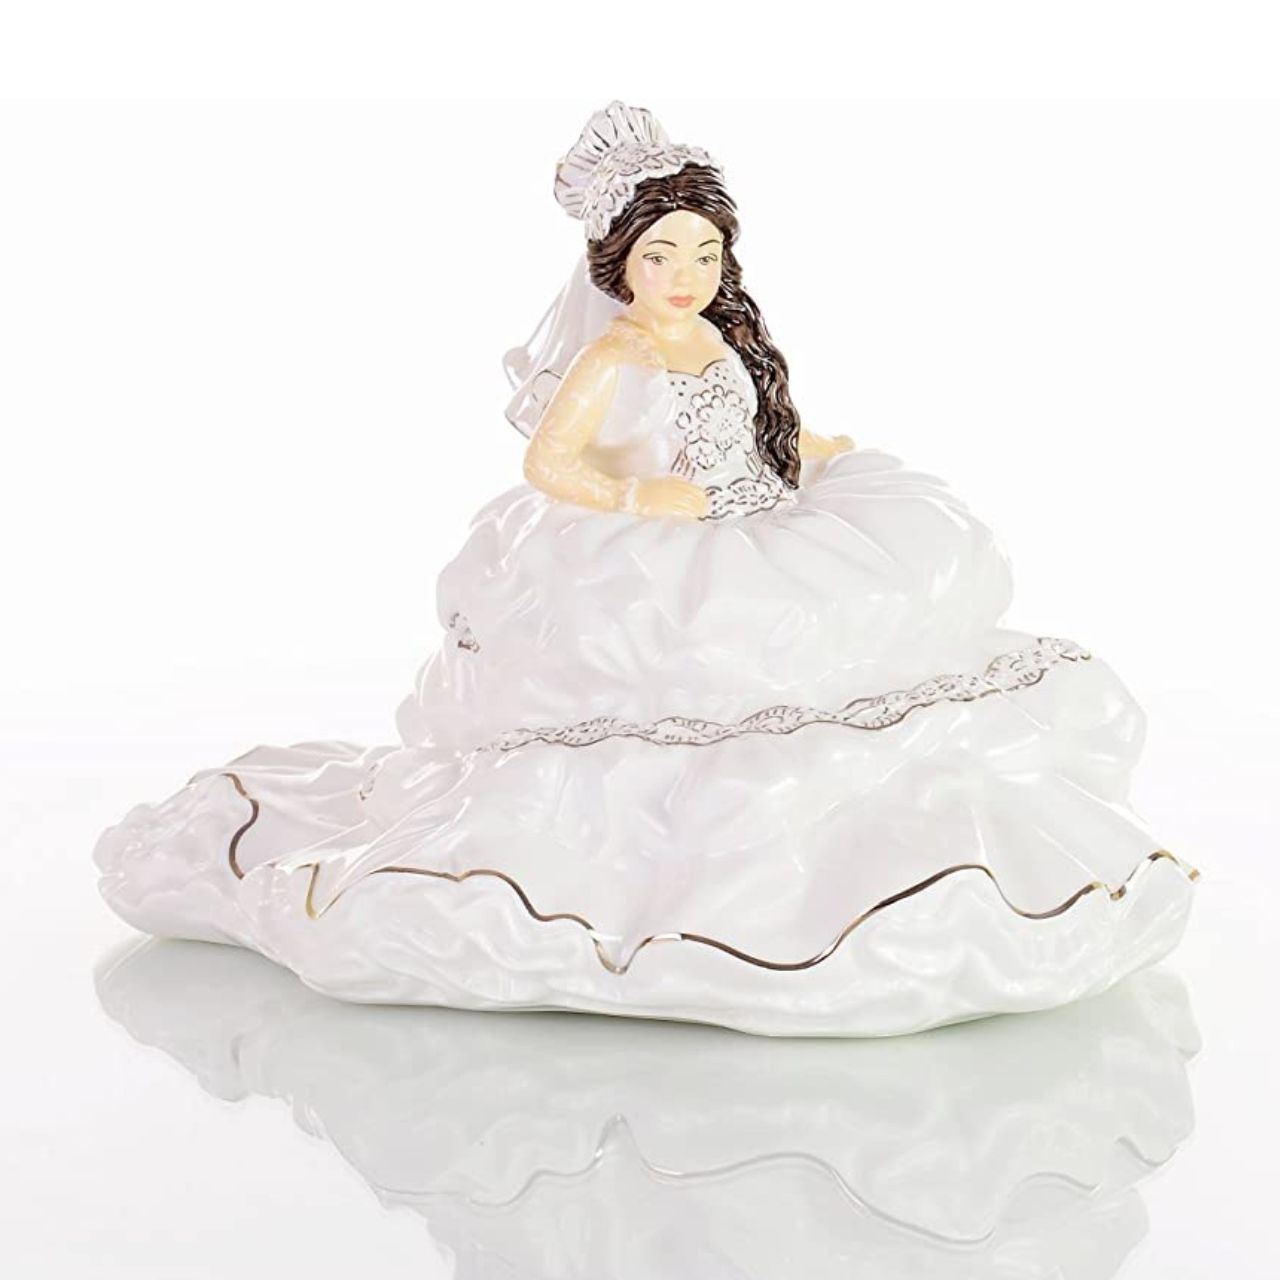 English Ladies Mini Fairytale Gypsy Bride Brunette  The Mini Fairytale Gypsy Brides are popular additions to the English Ladies Co’s figurine collection by Thelma Madine and make perfect Bridesmaids for the Fairytale Gypsy Bride!